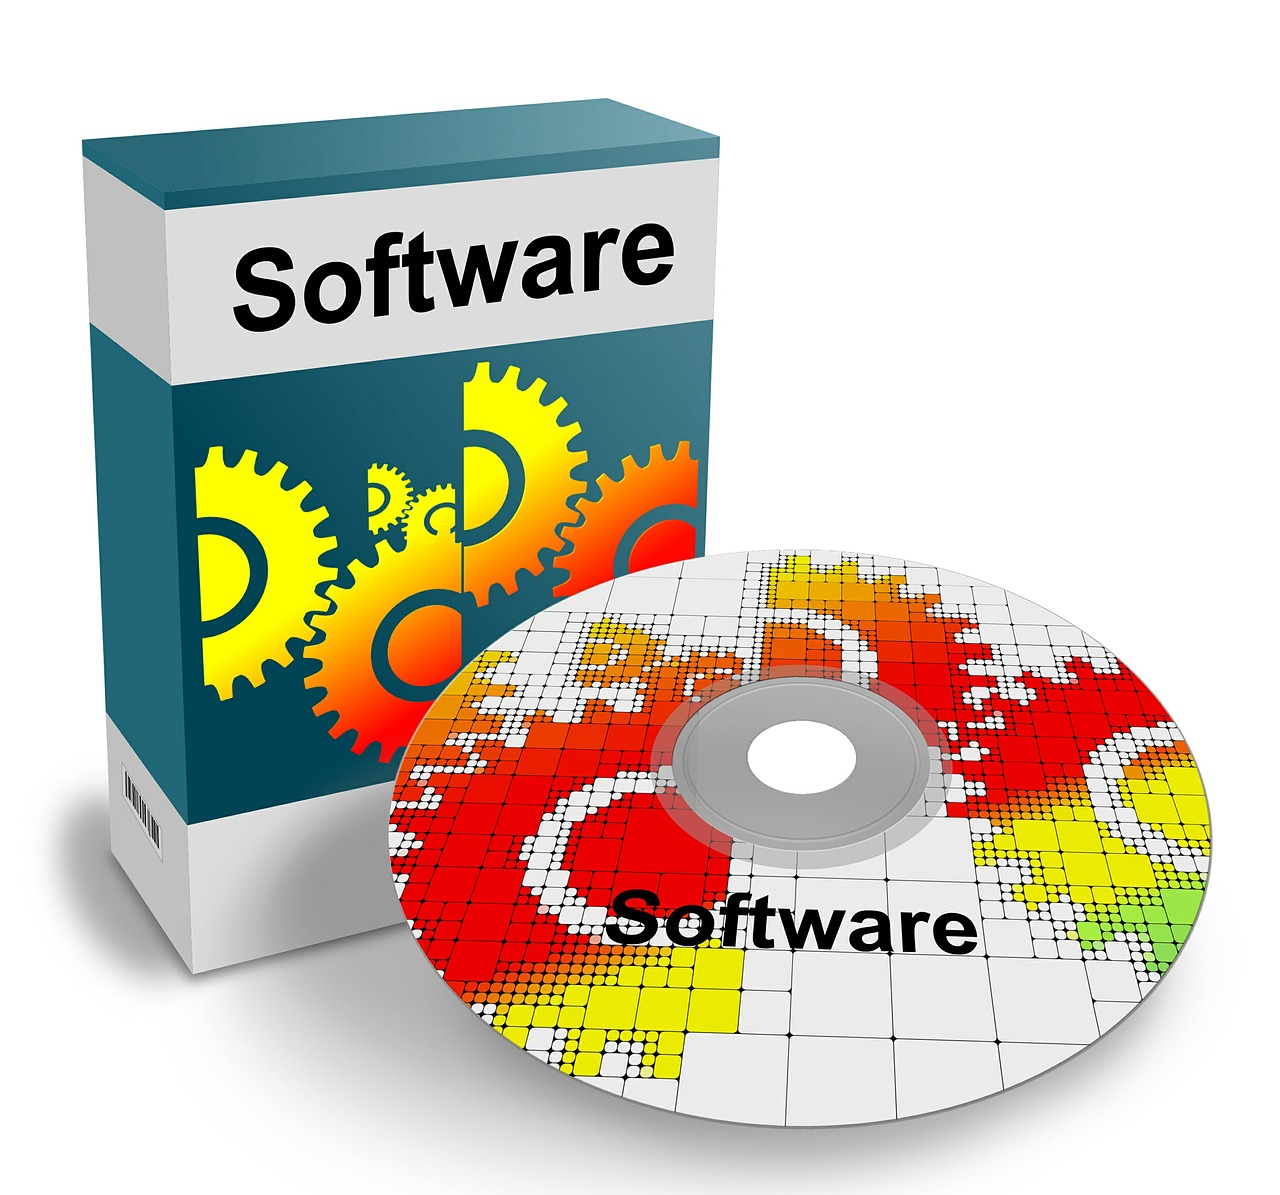 There are many Things to keep in mind when purchasing software